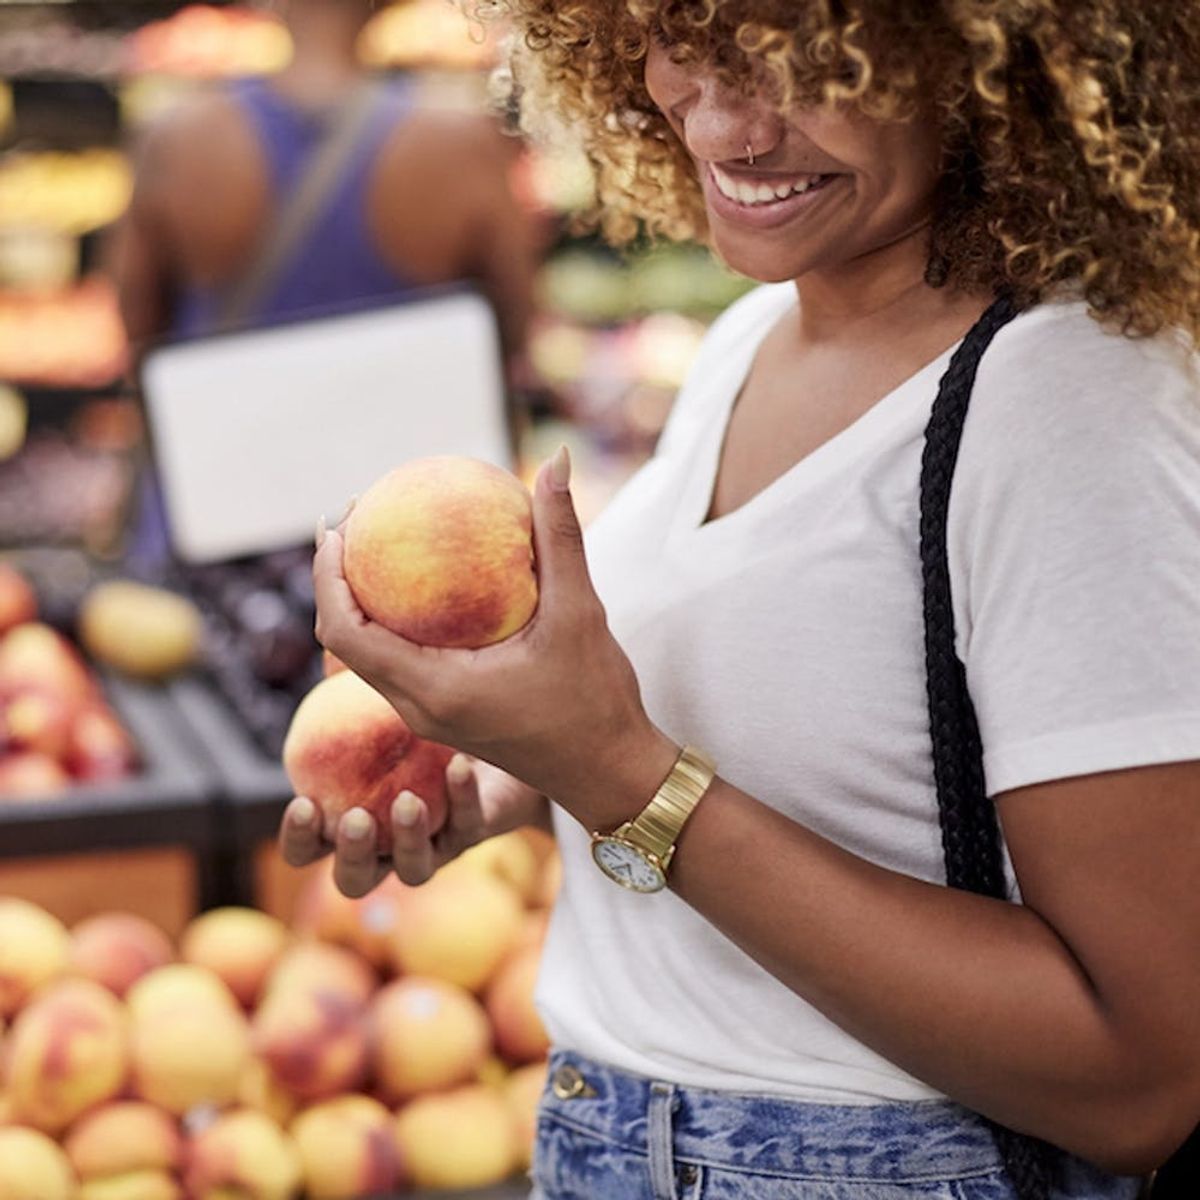 How to Make Grocery Shopping Healthier